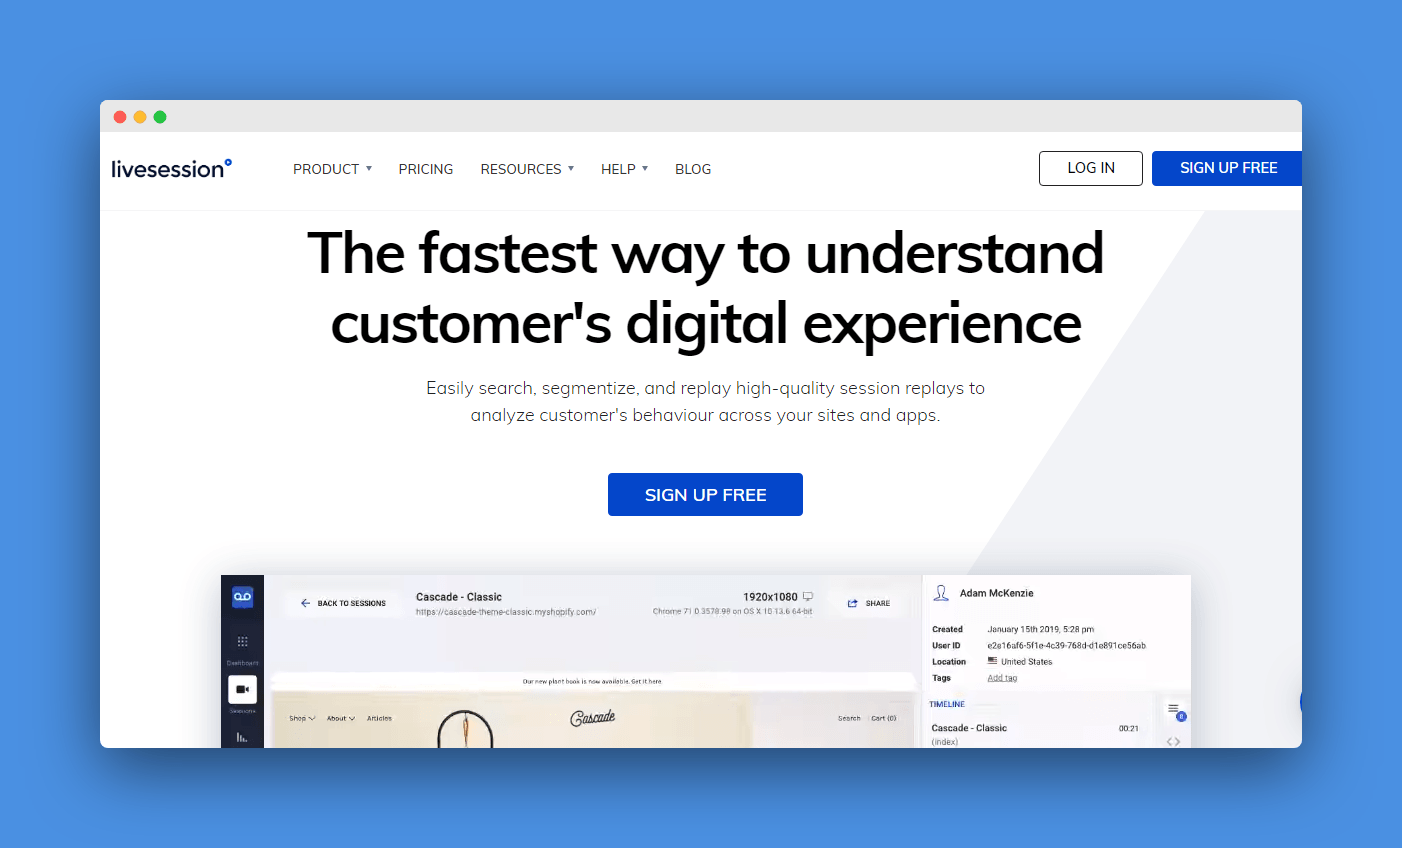 Traffic on a landing page